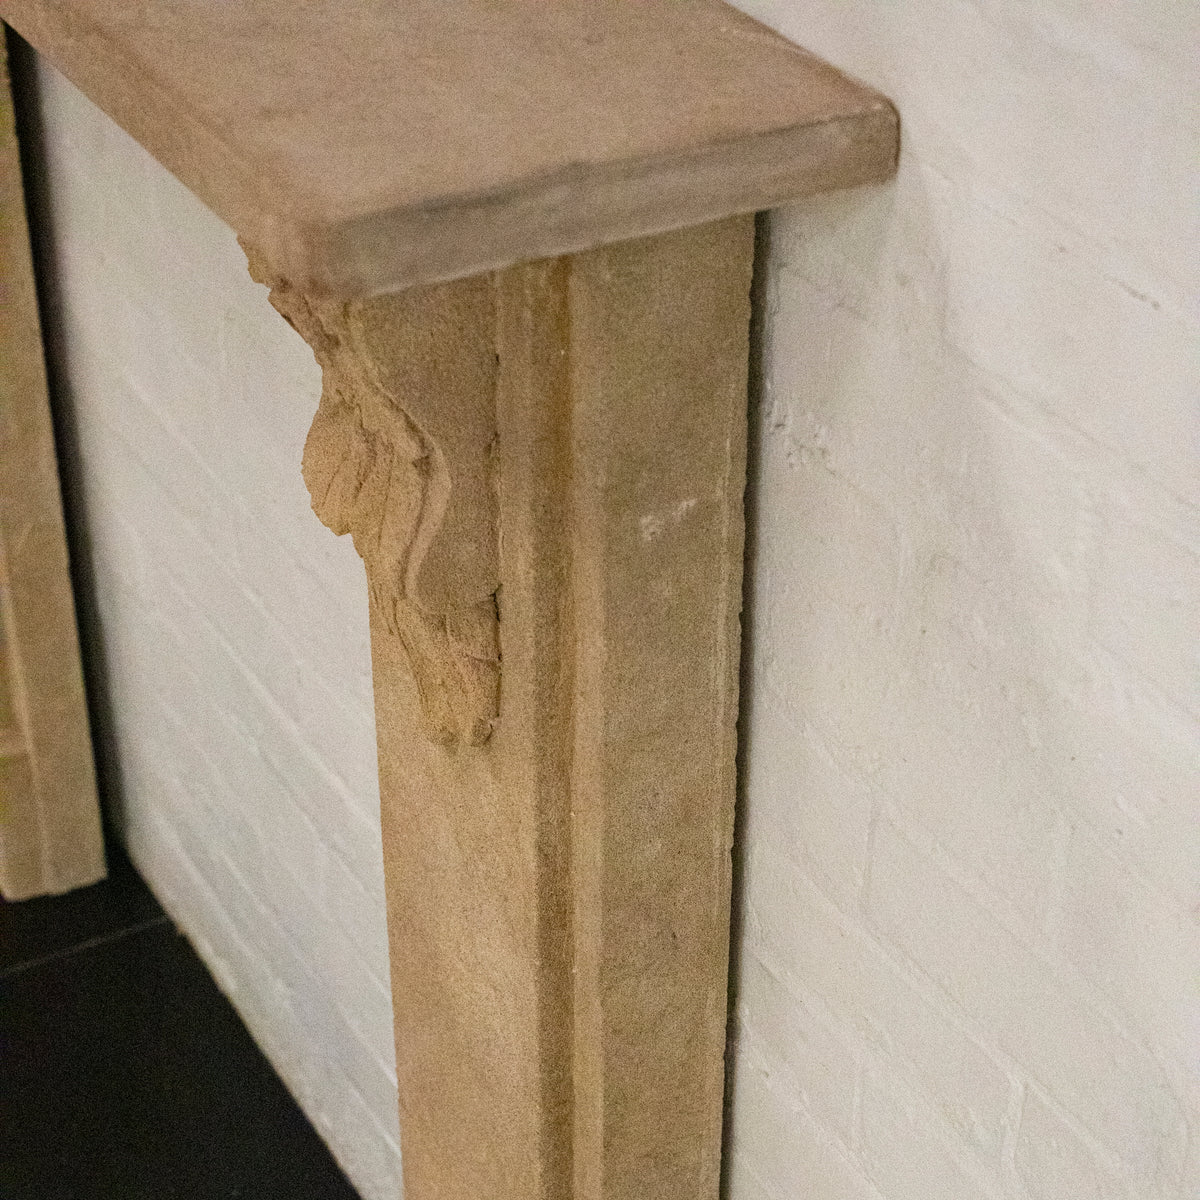 Antique Victorian Carved Bath Stone Surround with Leaf Corbels | The Architectural Forum